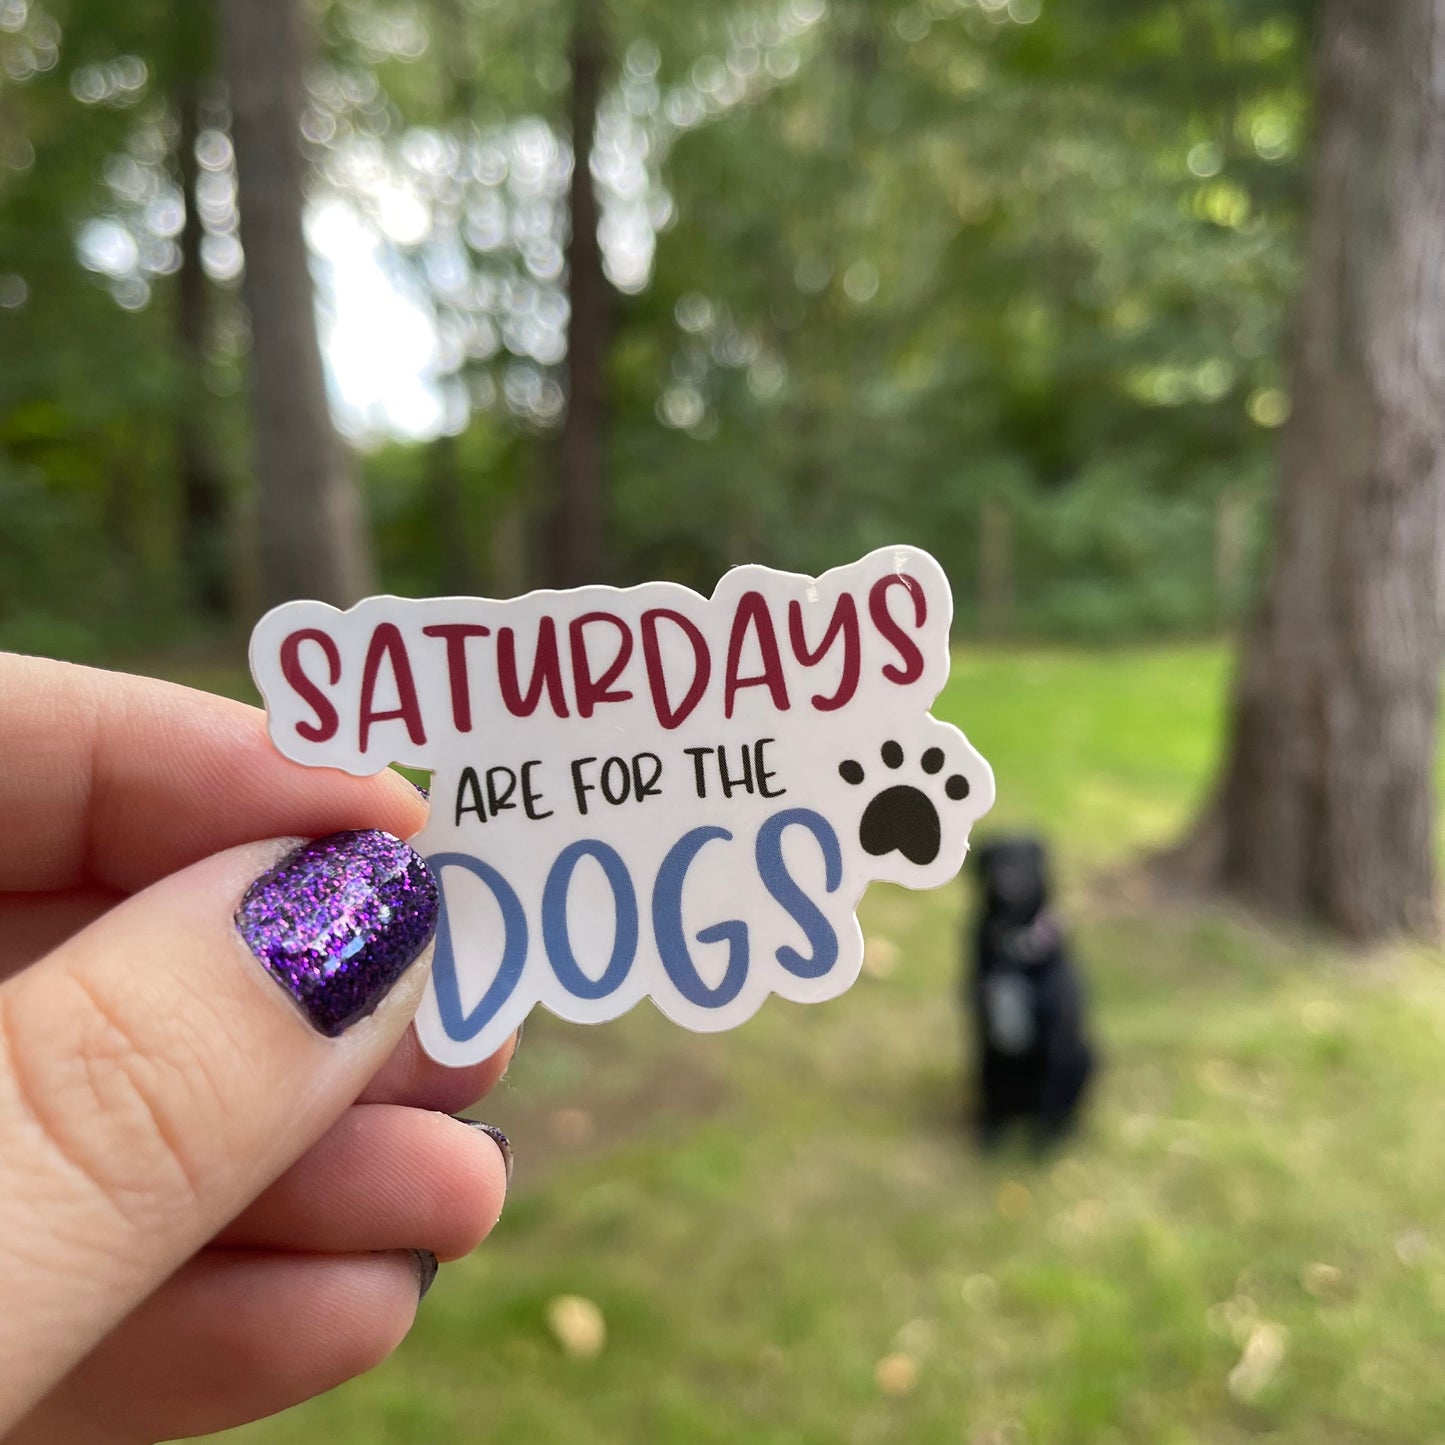 Saturdays are for the Dogs Sticker